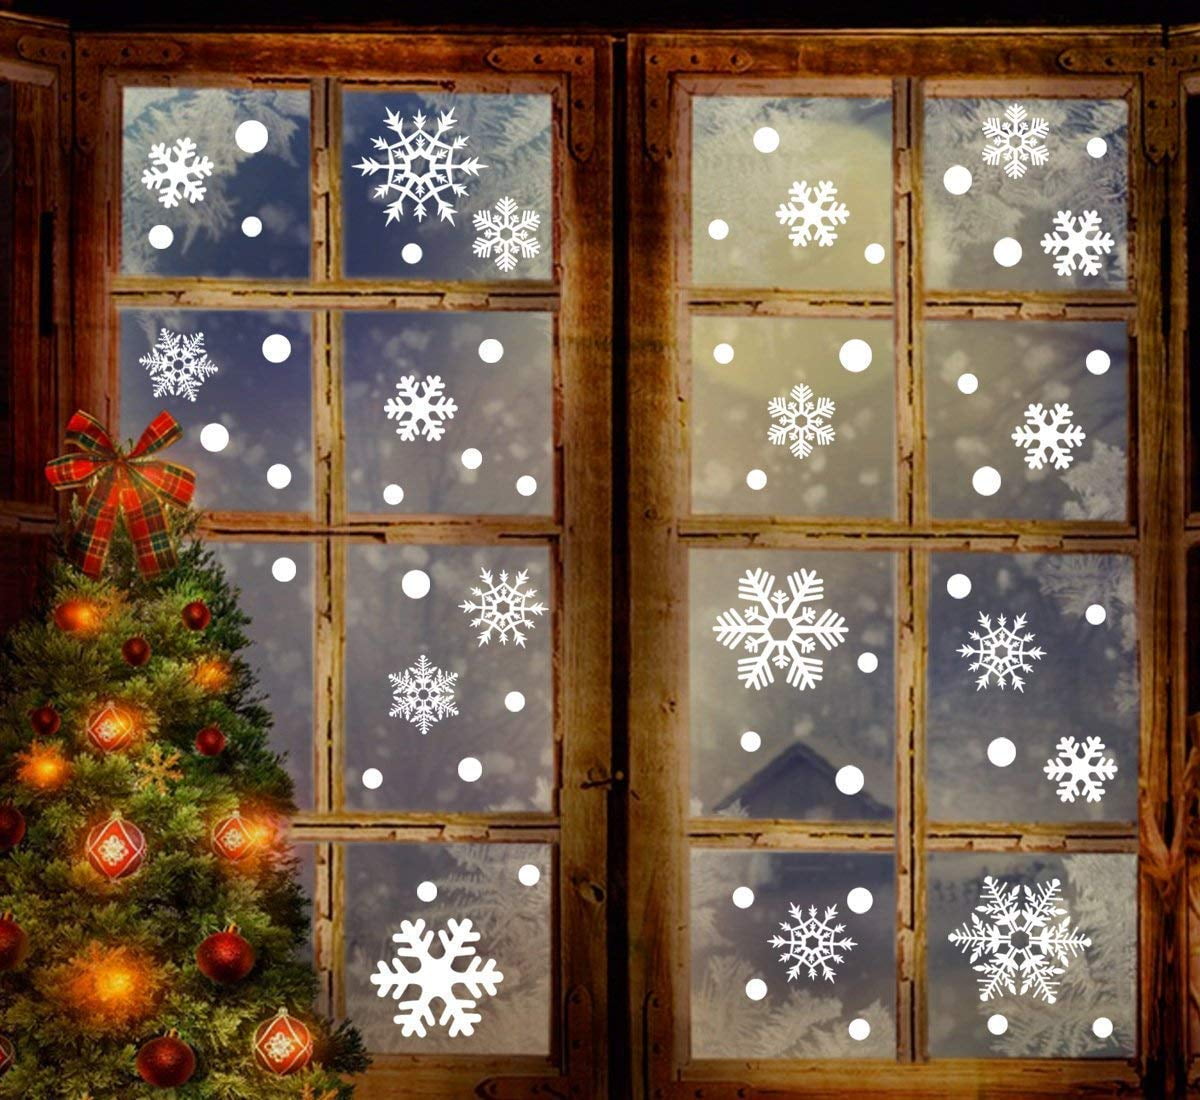 6 Sheets Christmas Stickers White Snowflake Window Glass Clings for Xmas New Year Winter Ice and Snow Theme Fashion Party Wonderland Decoration Ornaments Crafts 